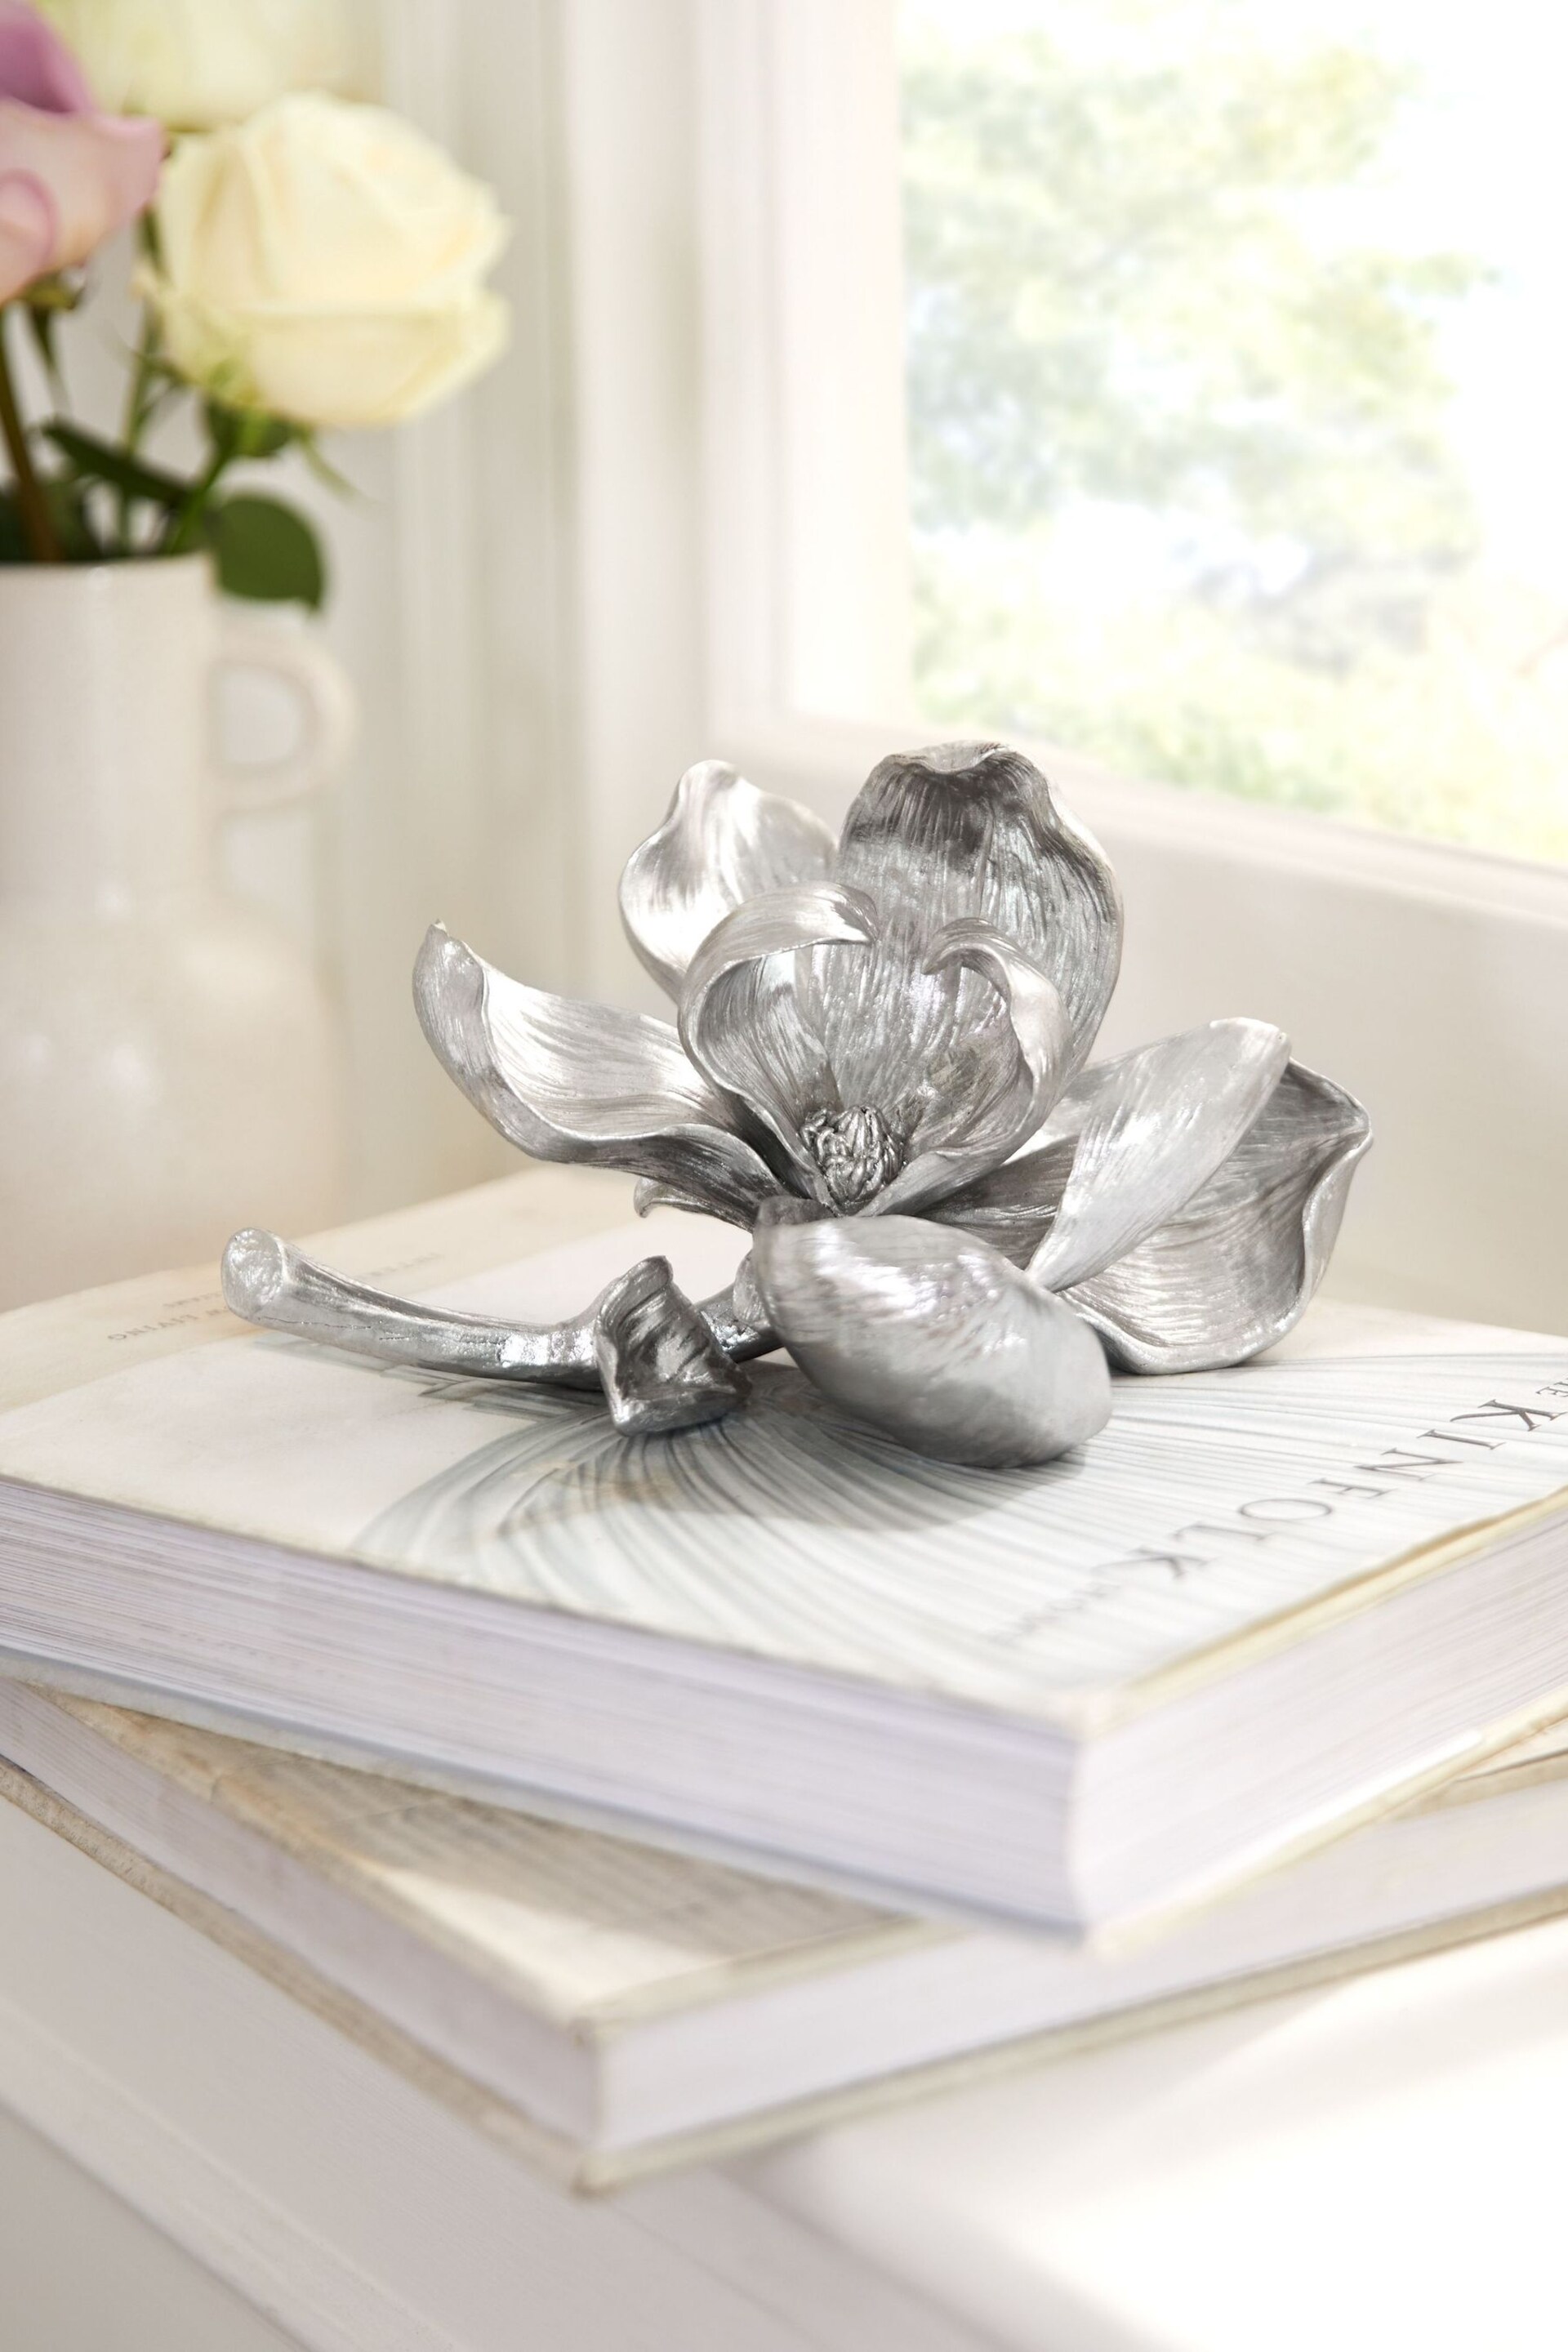 Silver Decorative Flower Ornament - Image 1 of 4